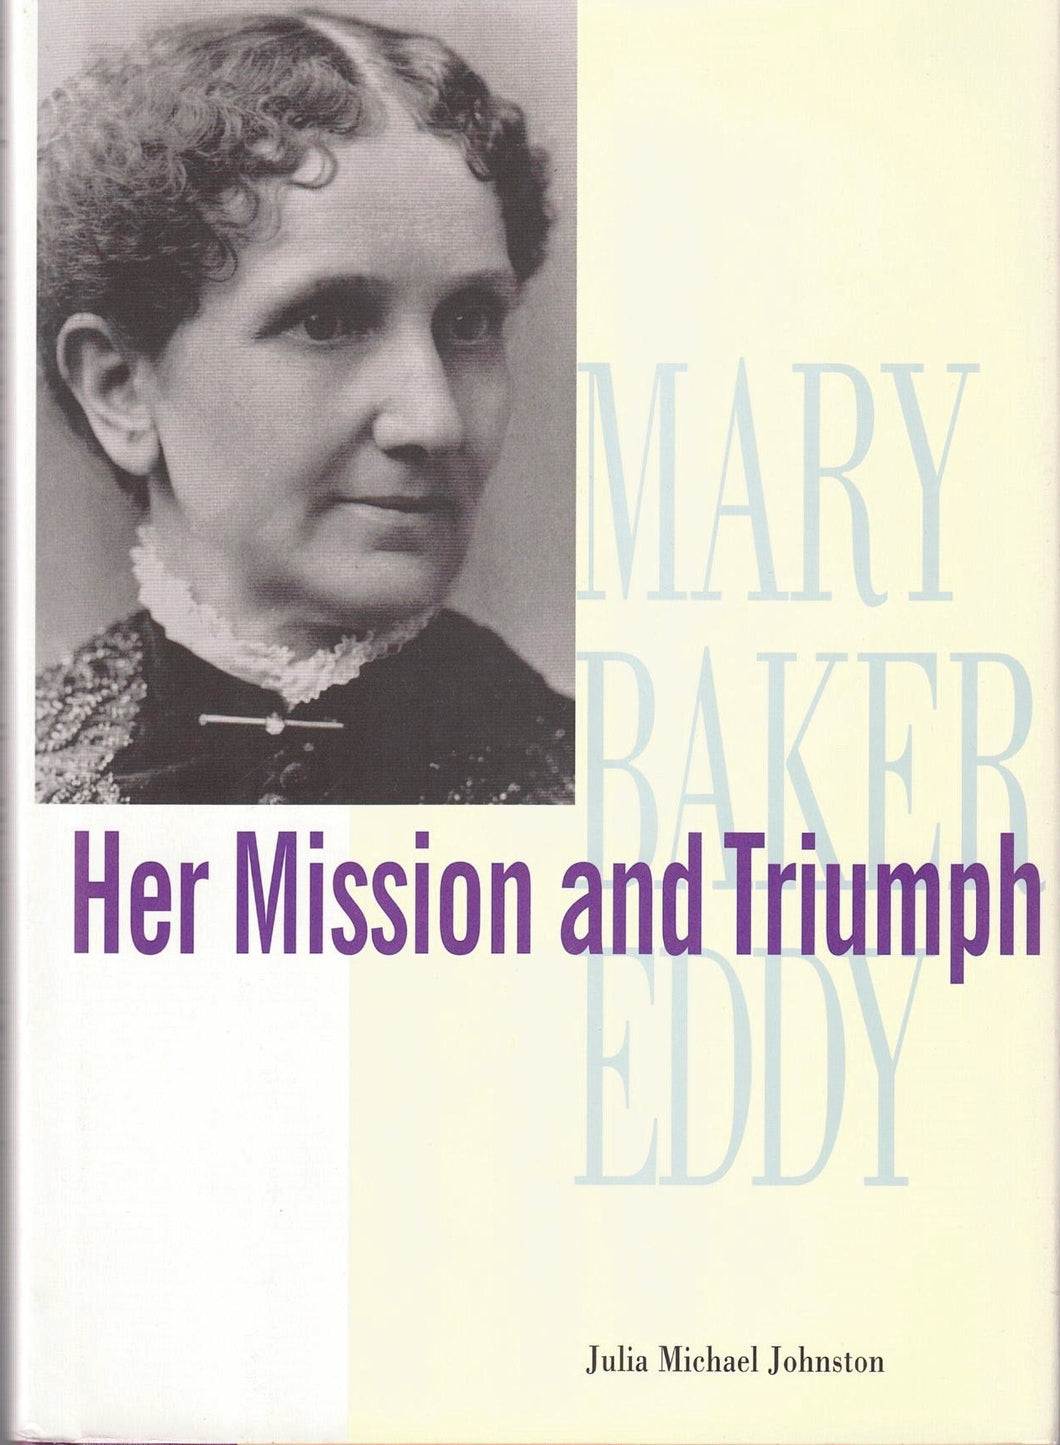 Mary Baker Eddy: Her Mission and Triumph